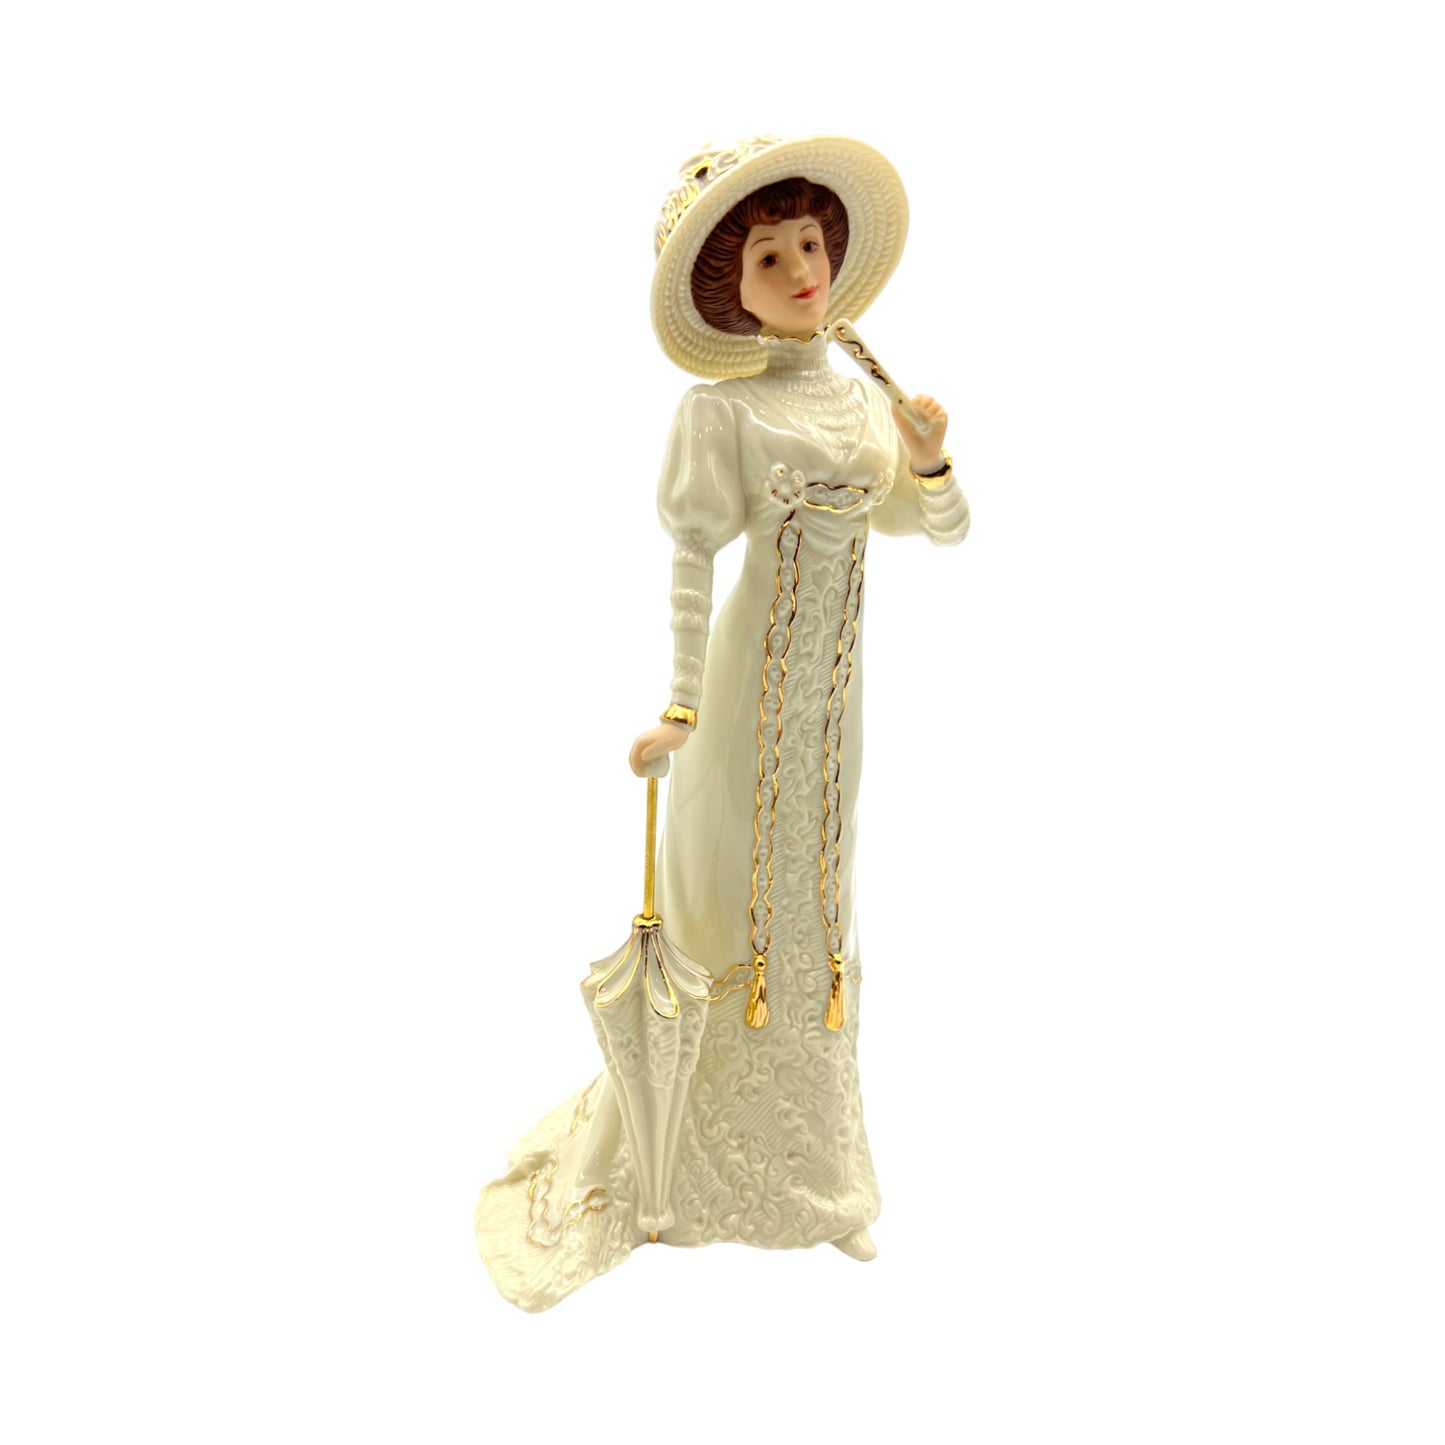 Lenox - Afternoon At Ascot Figurine - Victorian Ladies Of Fashion Collection - Original Box - 9.25"